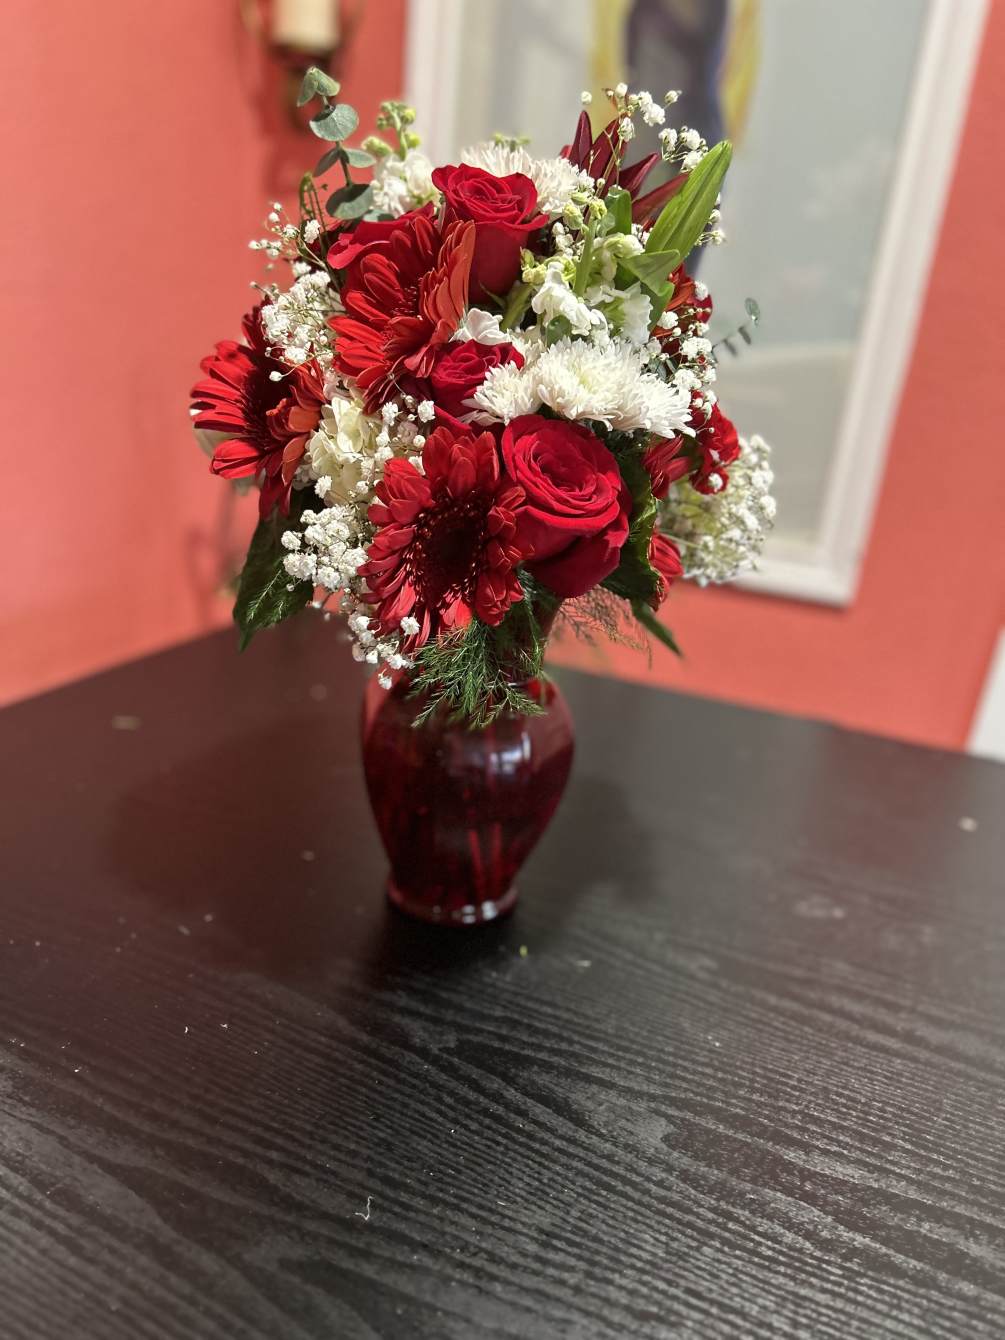 Red and white roses, daisies, stock, and lilies 